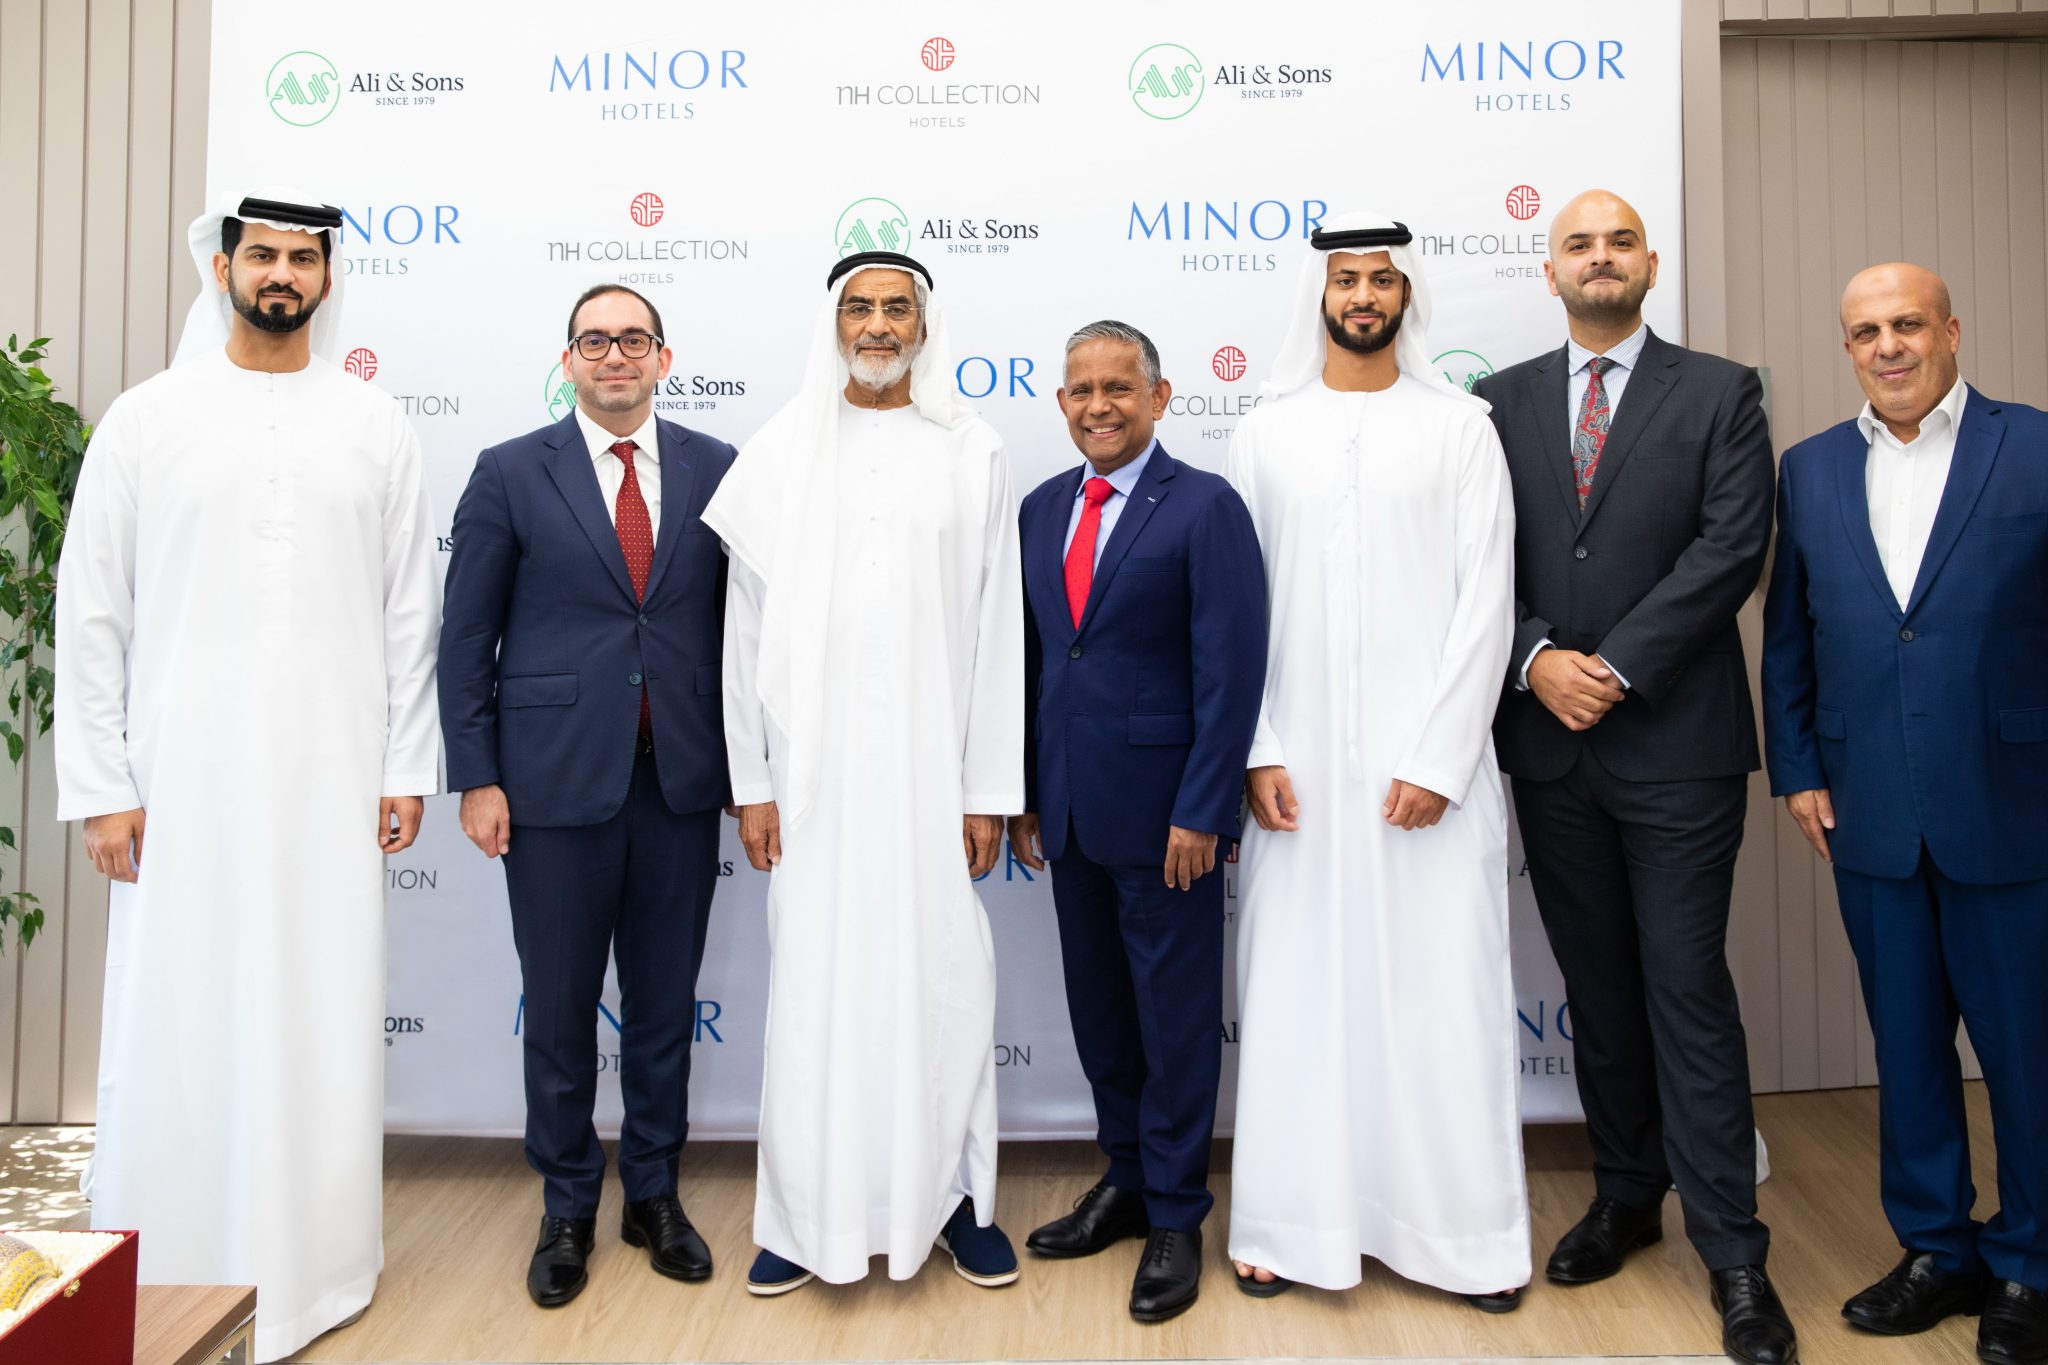 Minor Hotels announces the opening of its first NH Collection hotel in Dubai